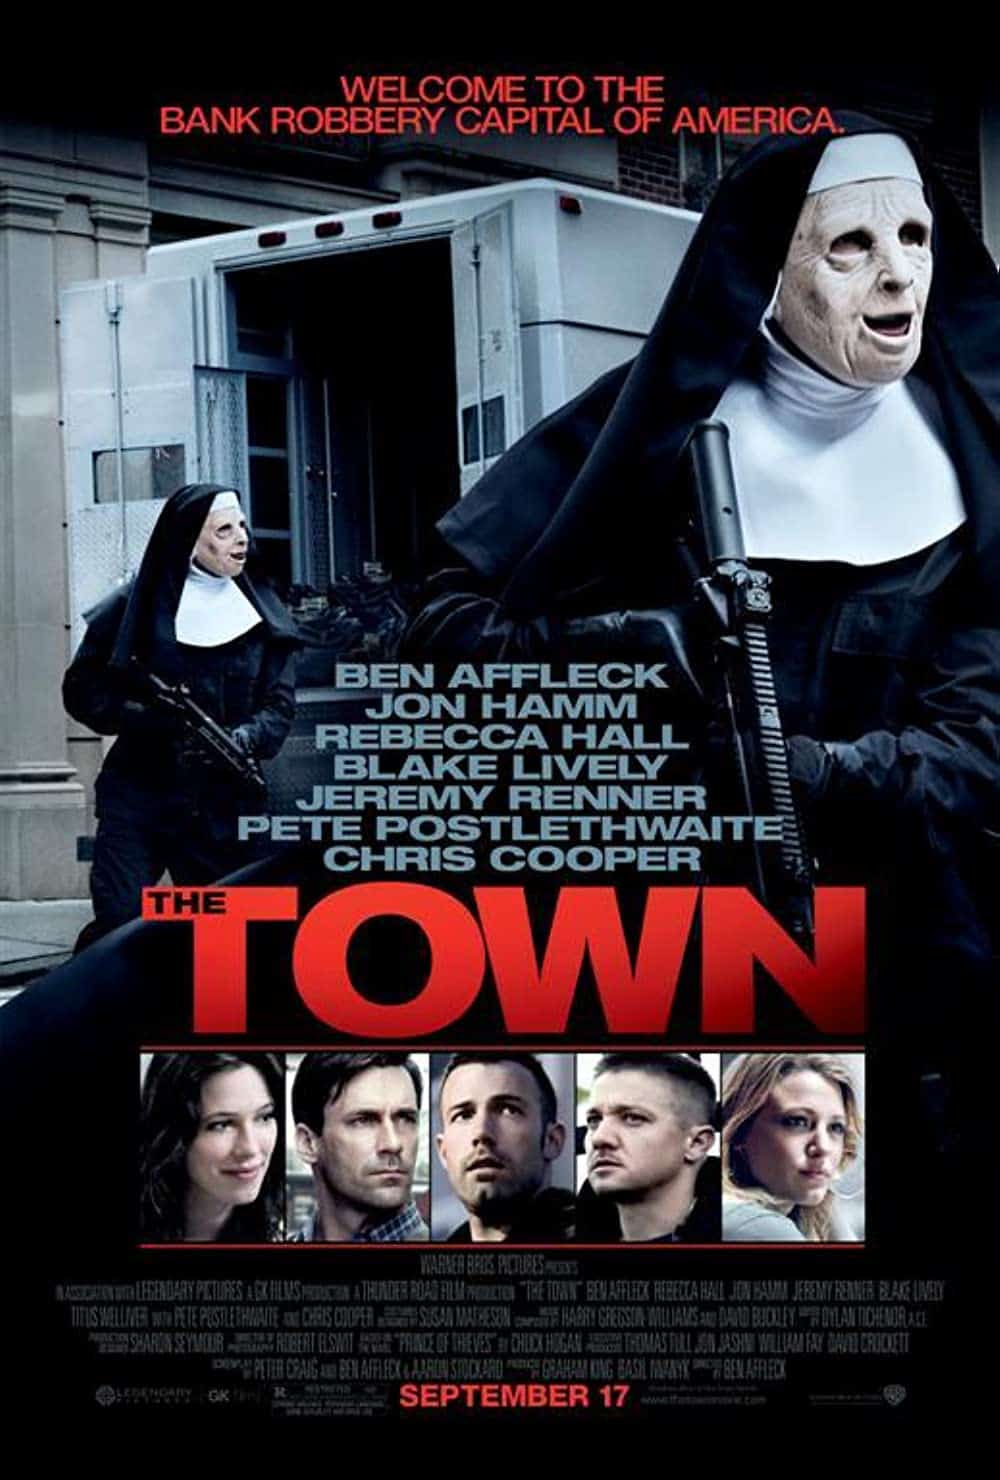 The Town (2010) Best Ben Affleck Movies of All Time